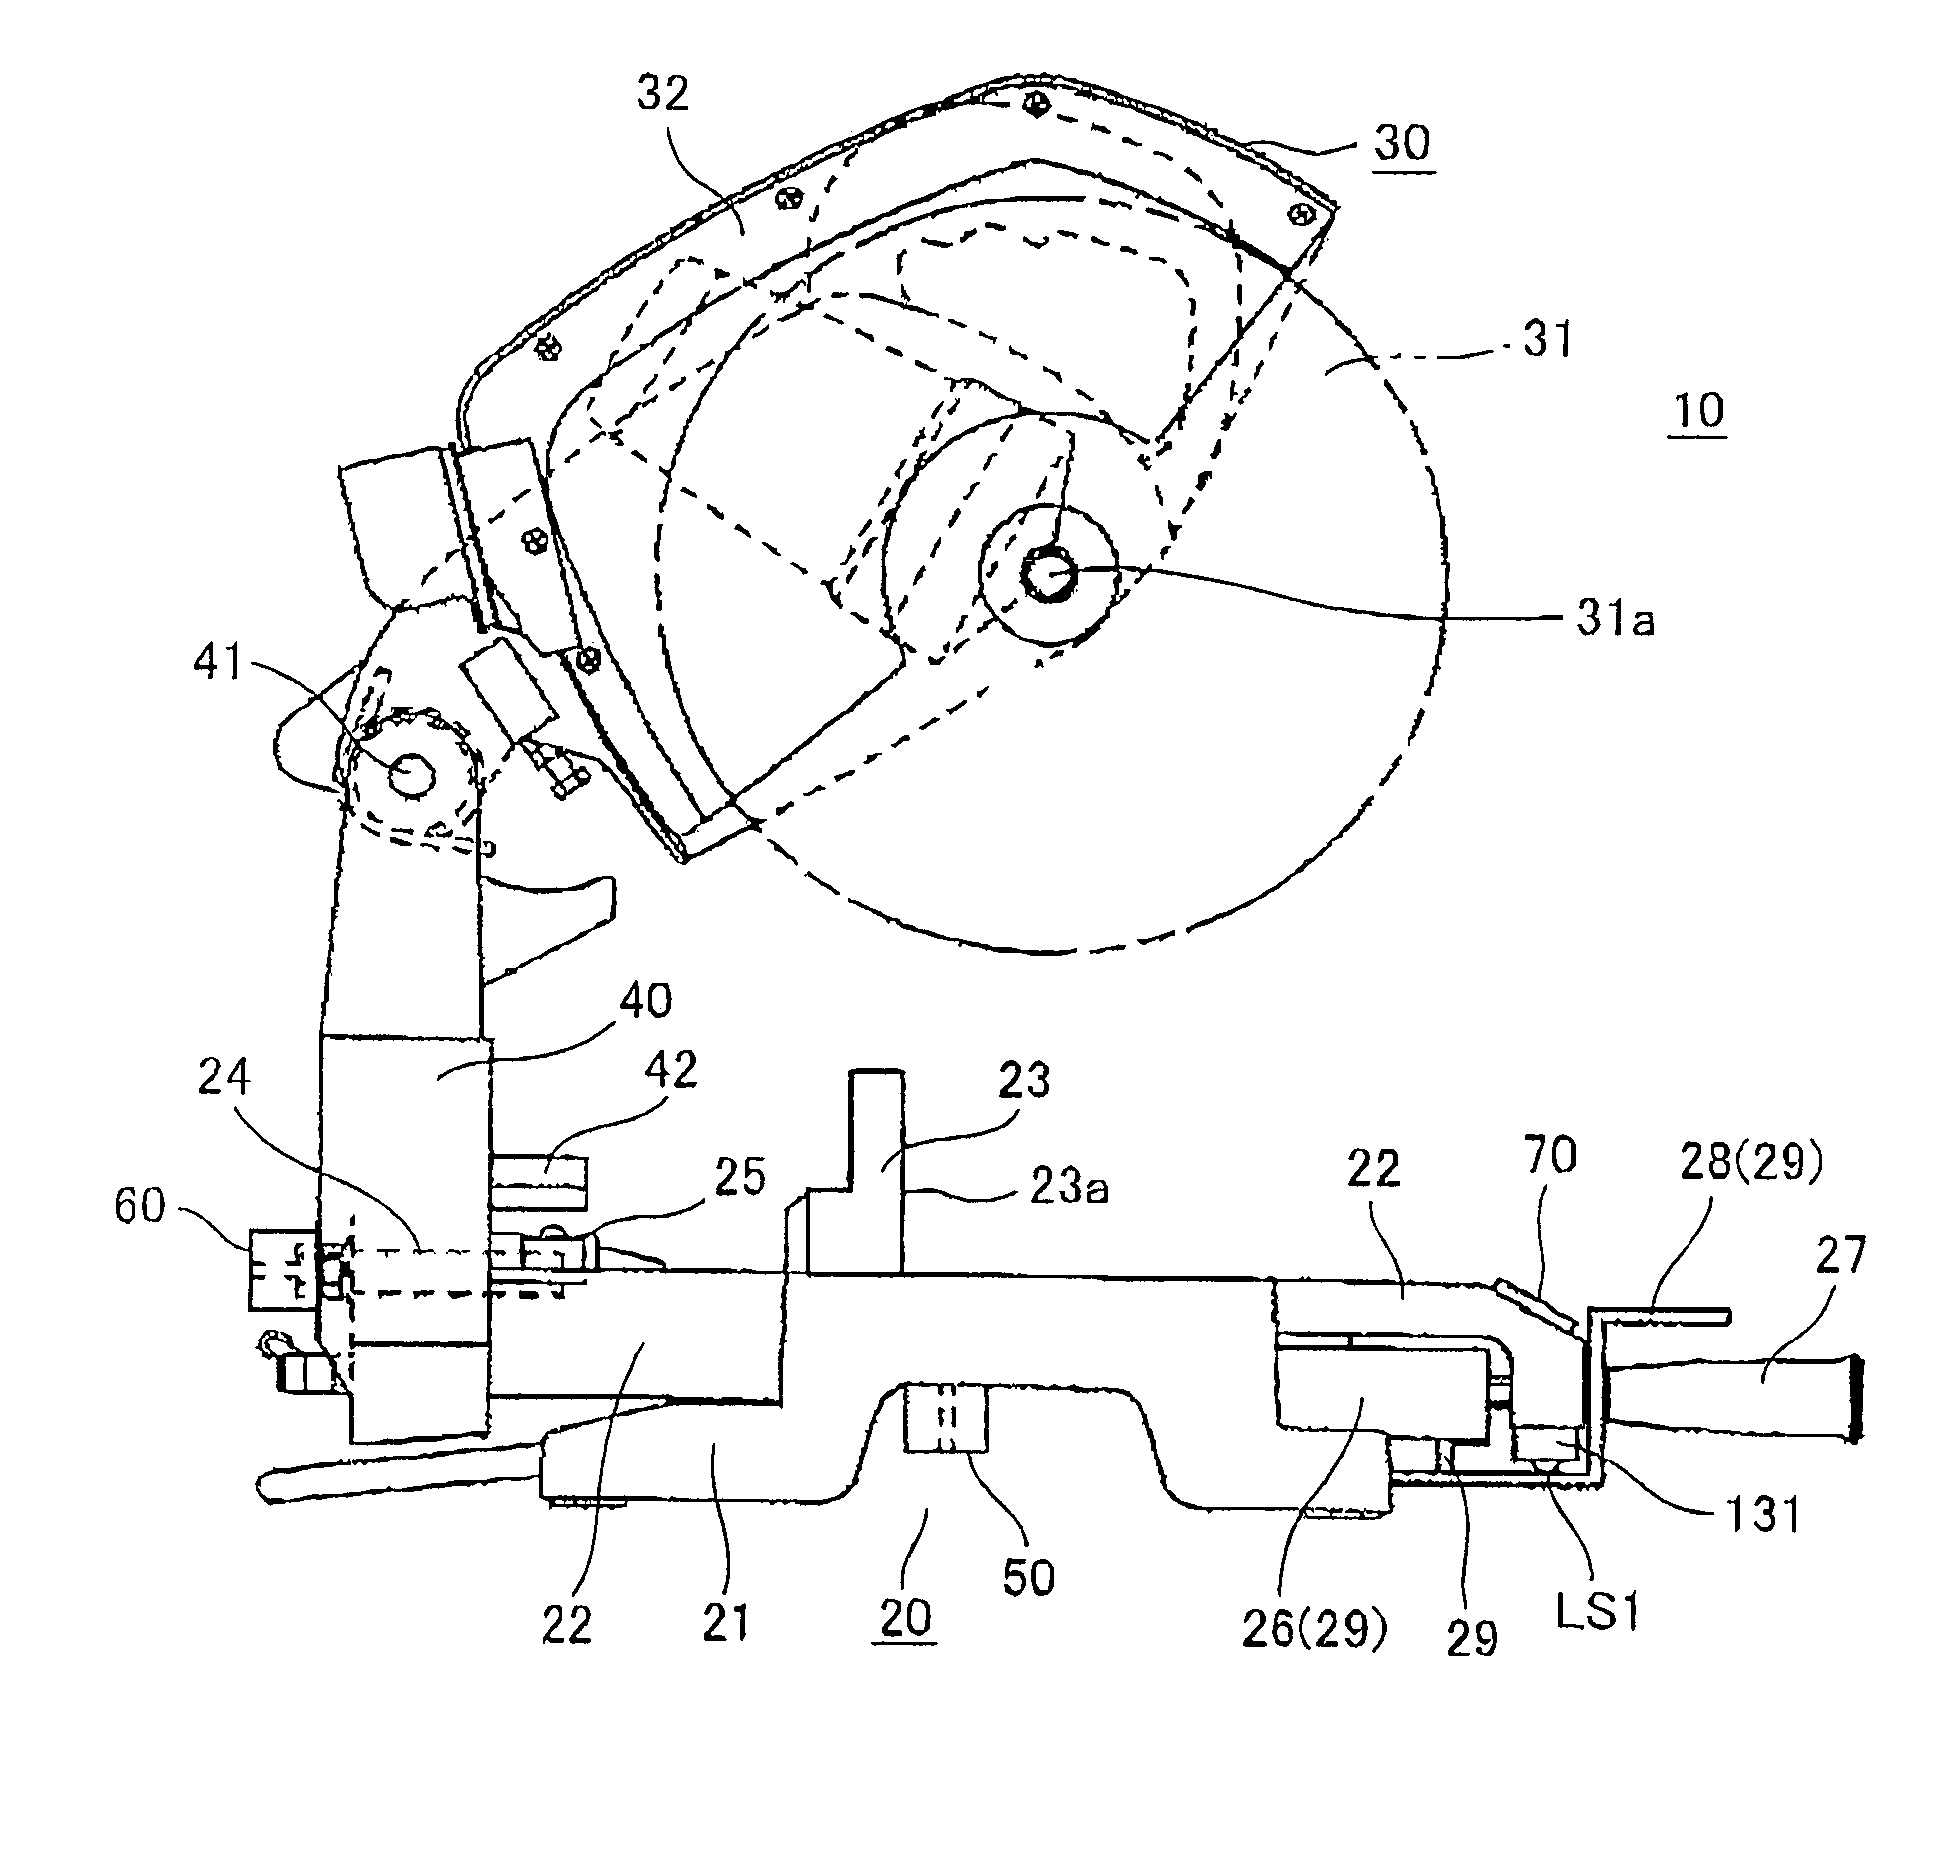 Miter saw for displaying angle of cutter blade cutting workpiece